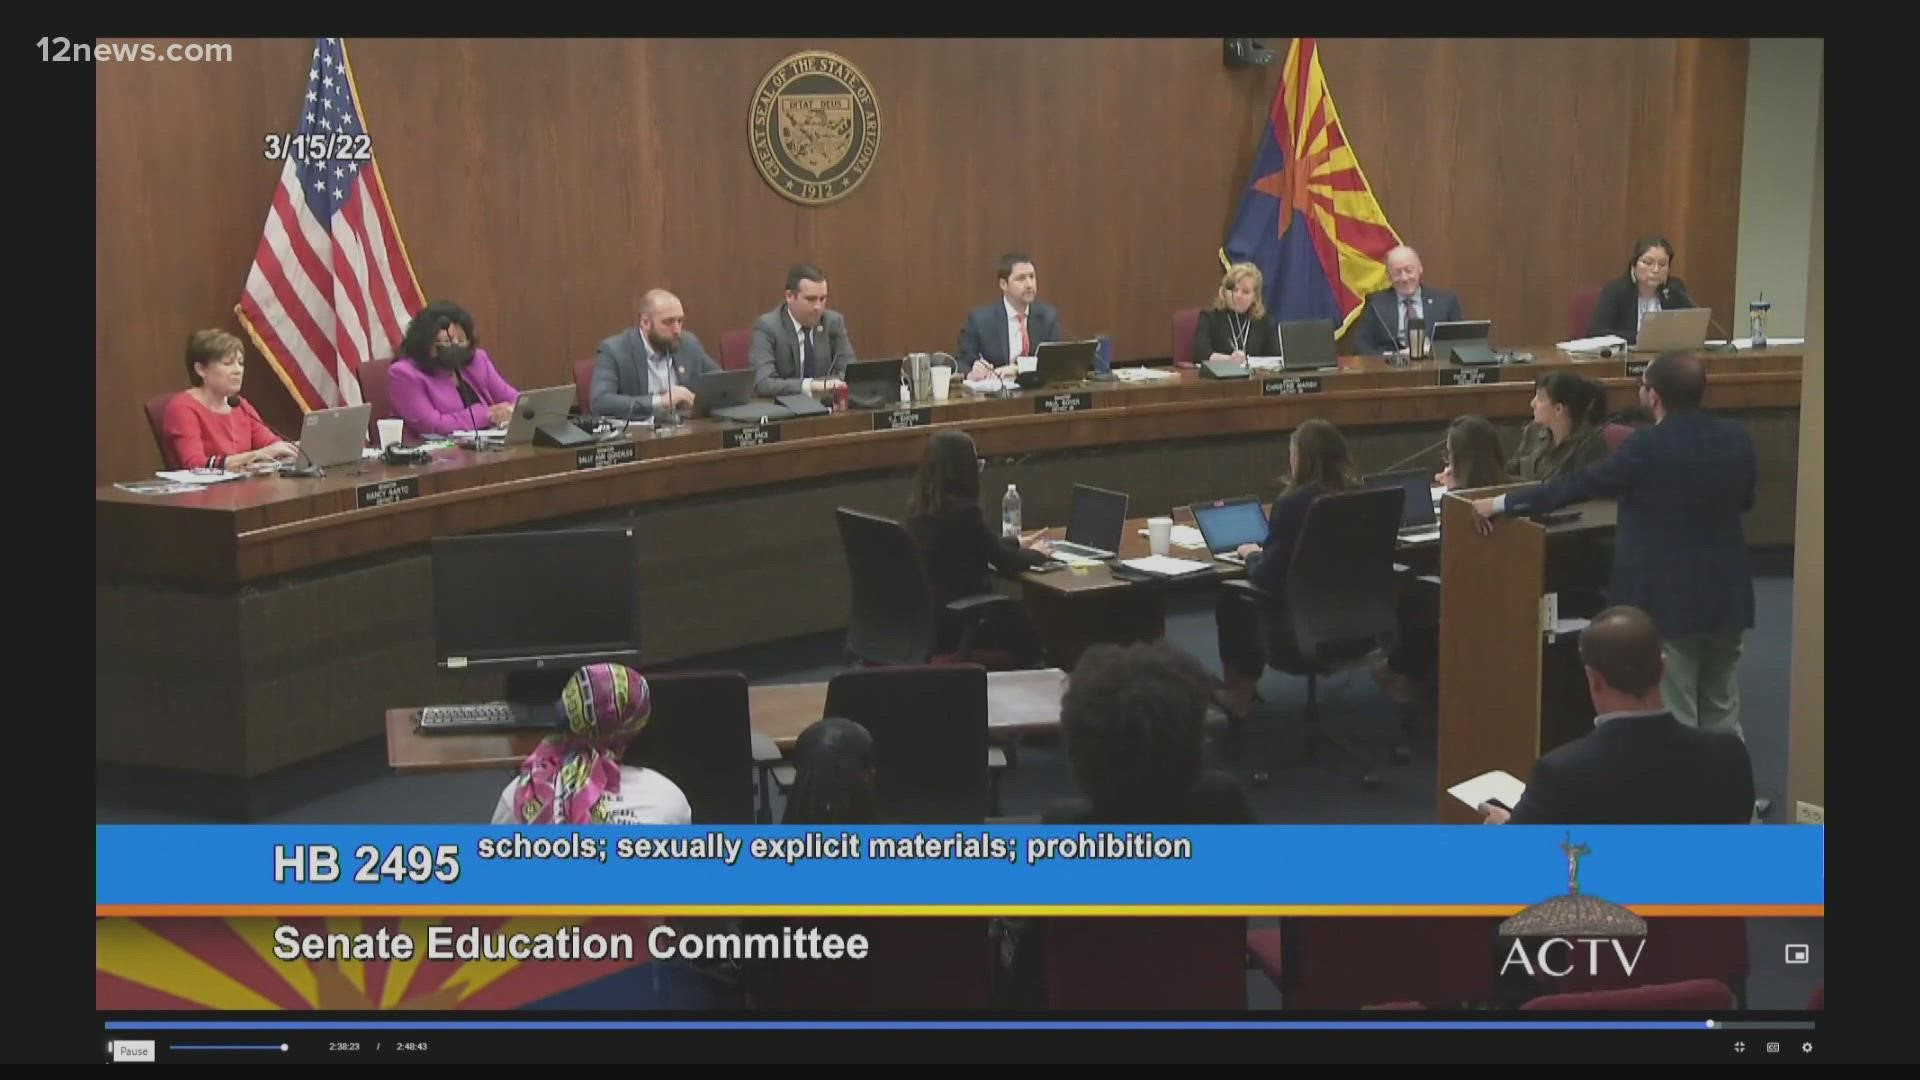 A bill that would ban sexually explicit books in Arizona schools has stalled in the legislature. The bill's sponsor is trying to fire up support.